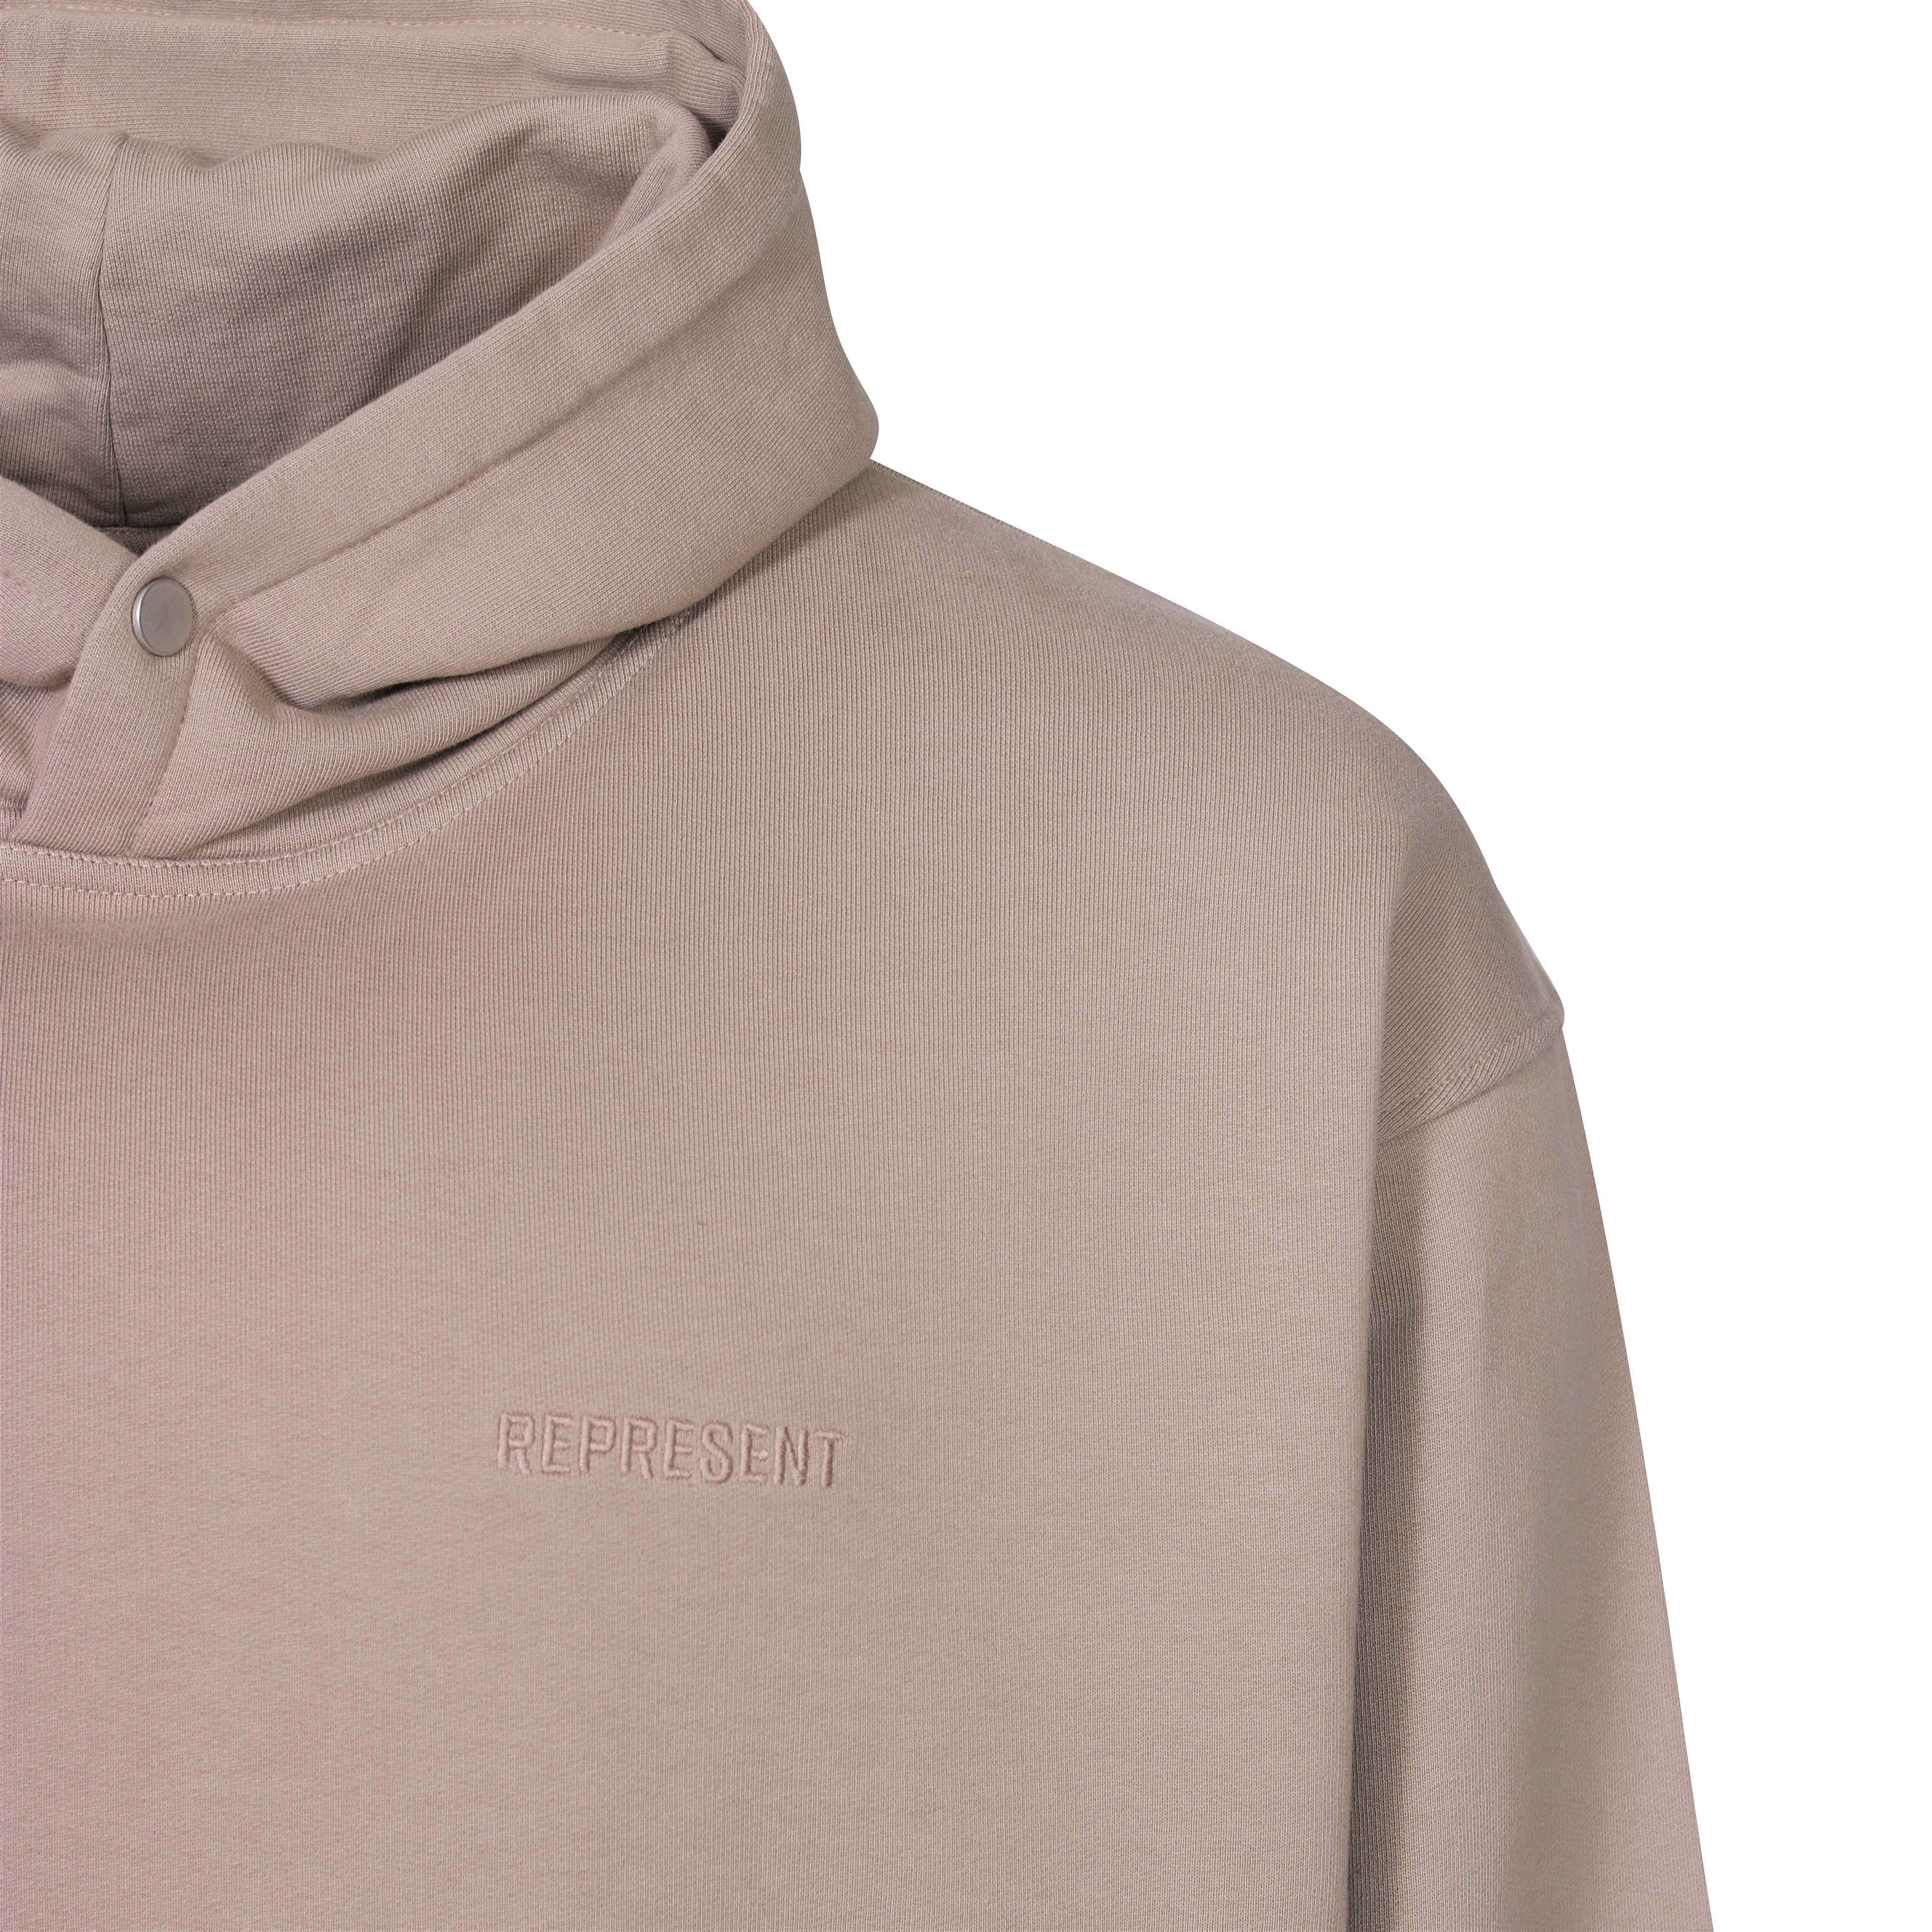 Represent Blank Hoodie in Taupe